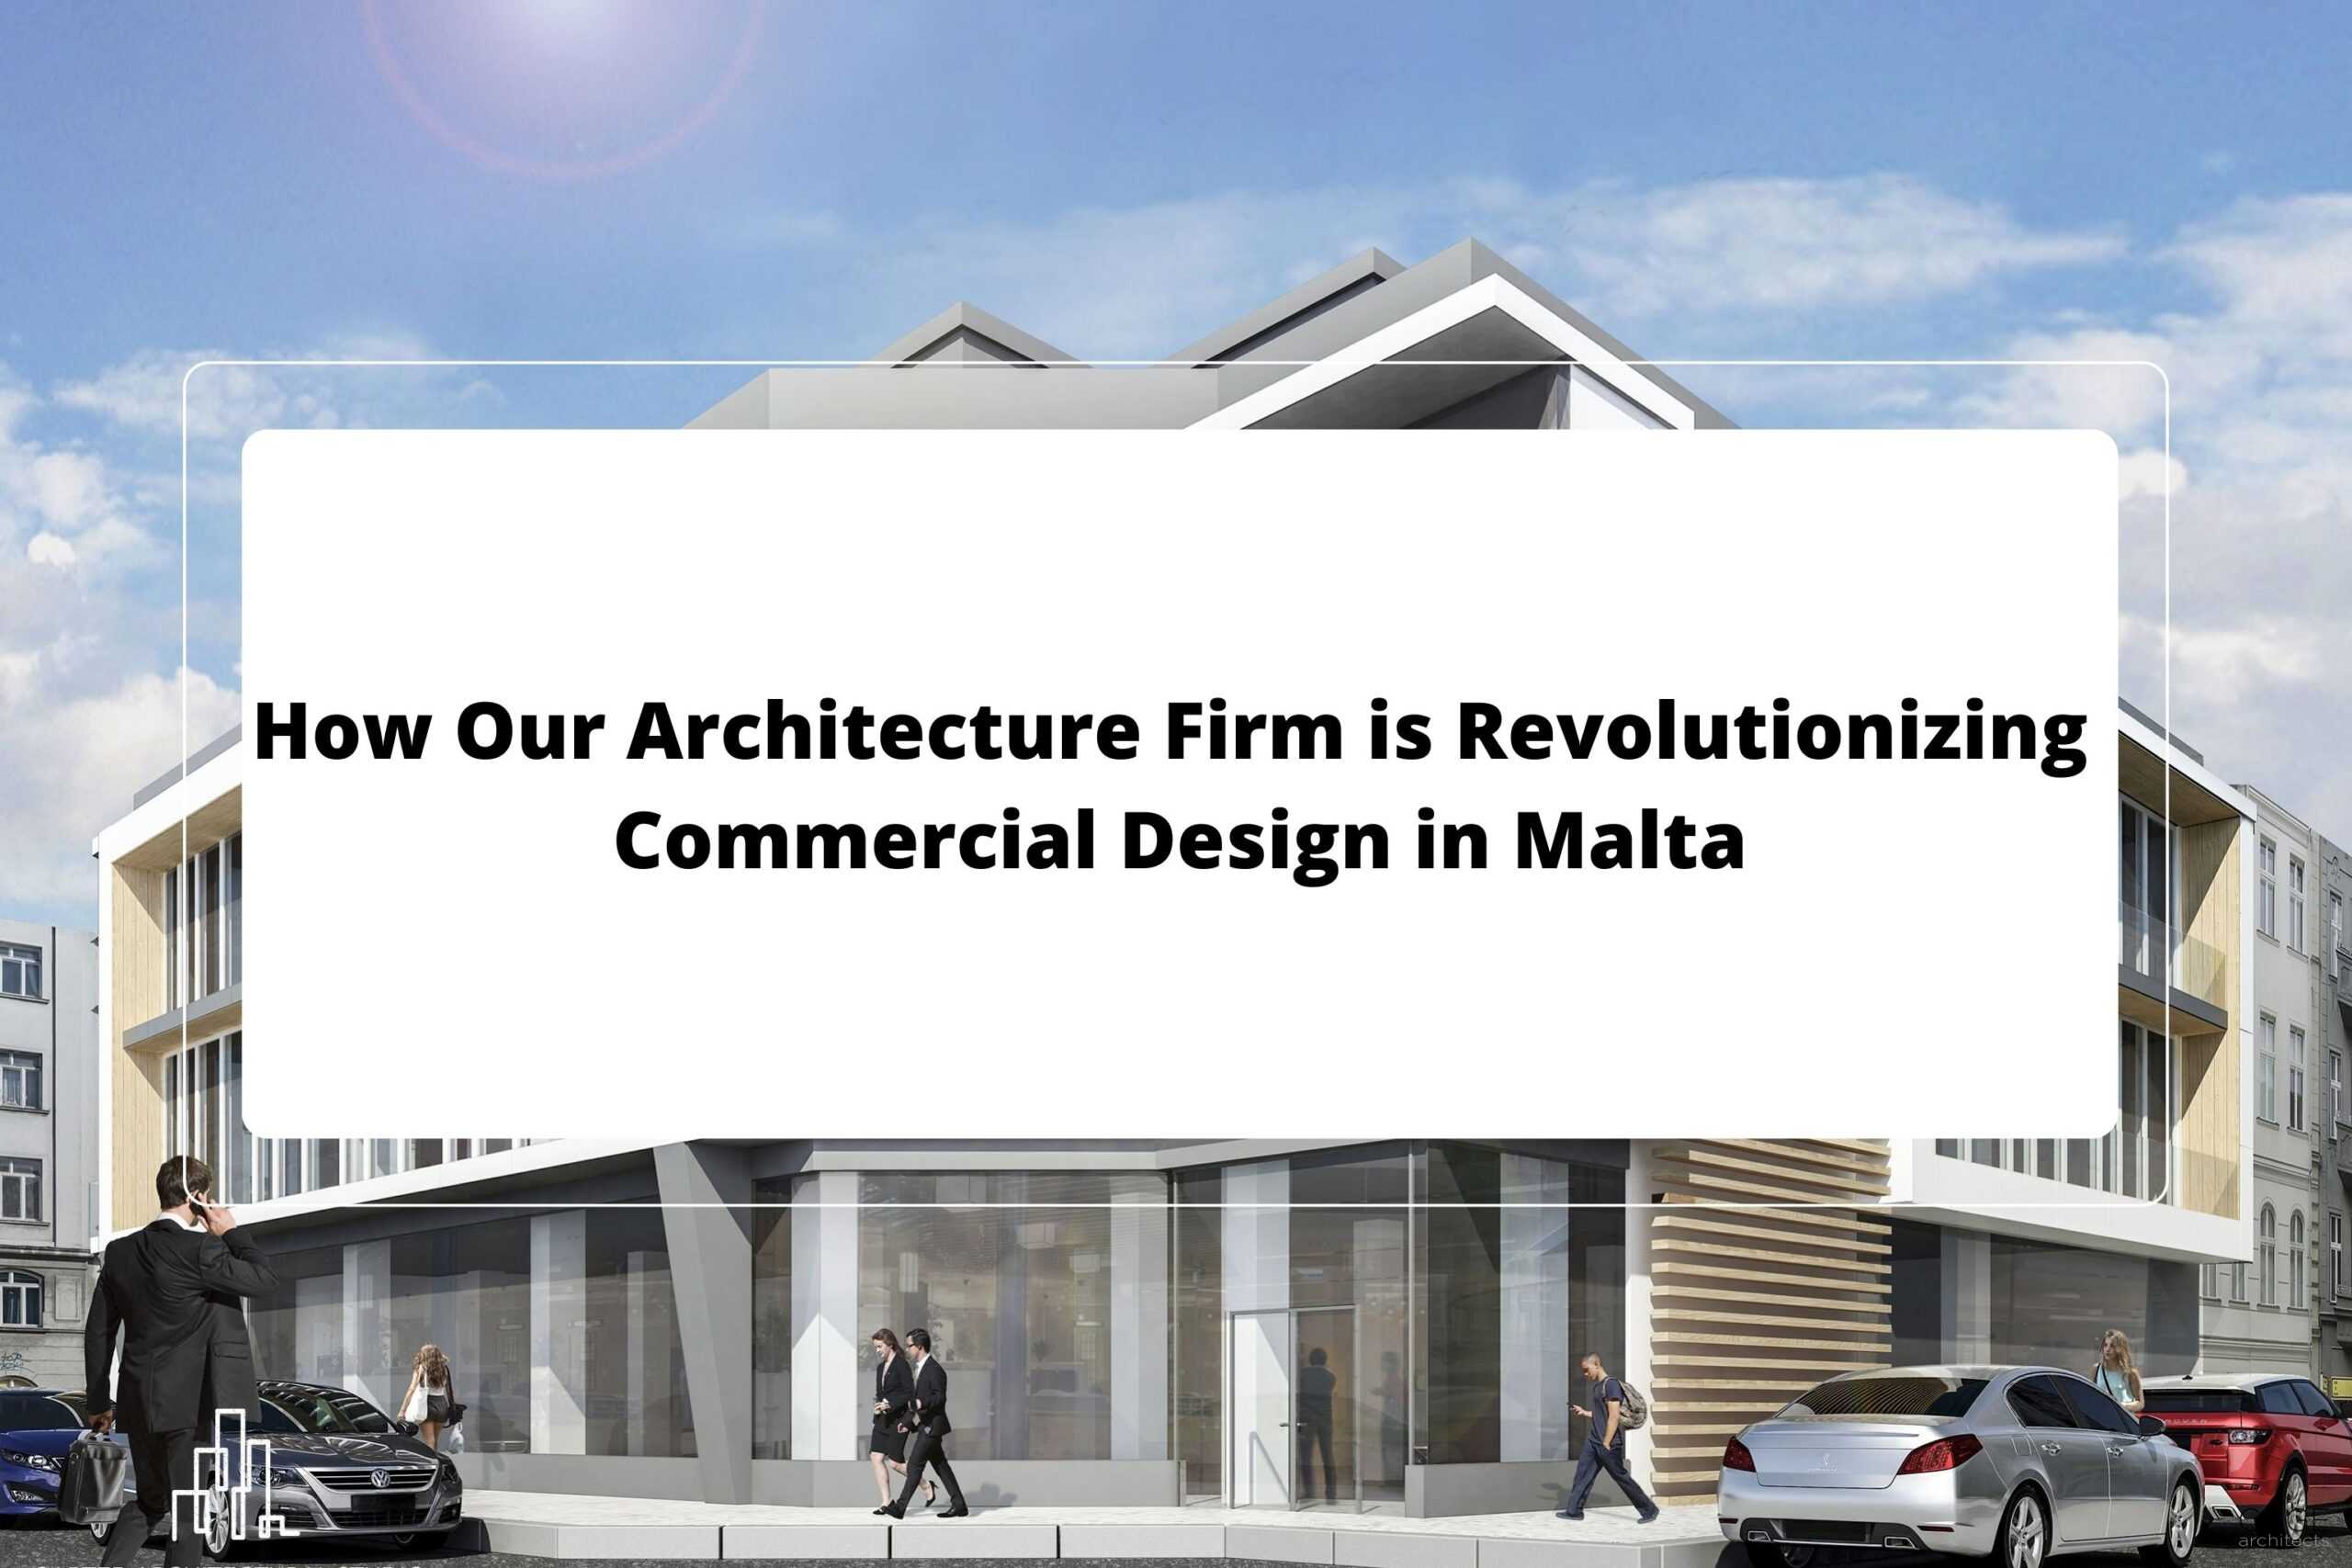 How Our Architecture Firm is Revolutionizing Commercial Design in Malta